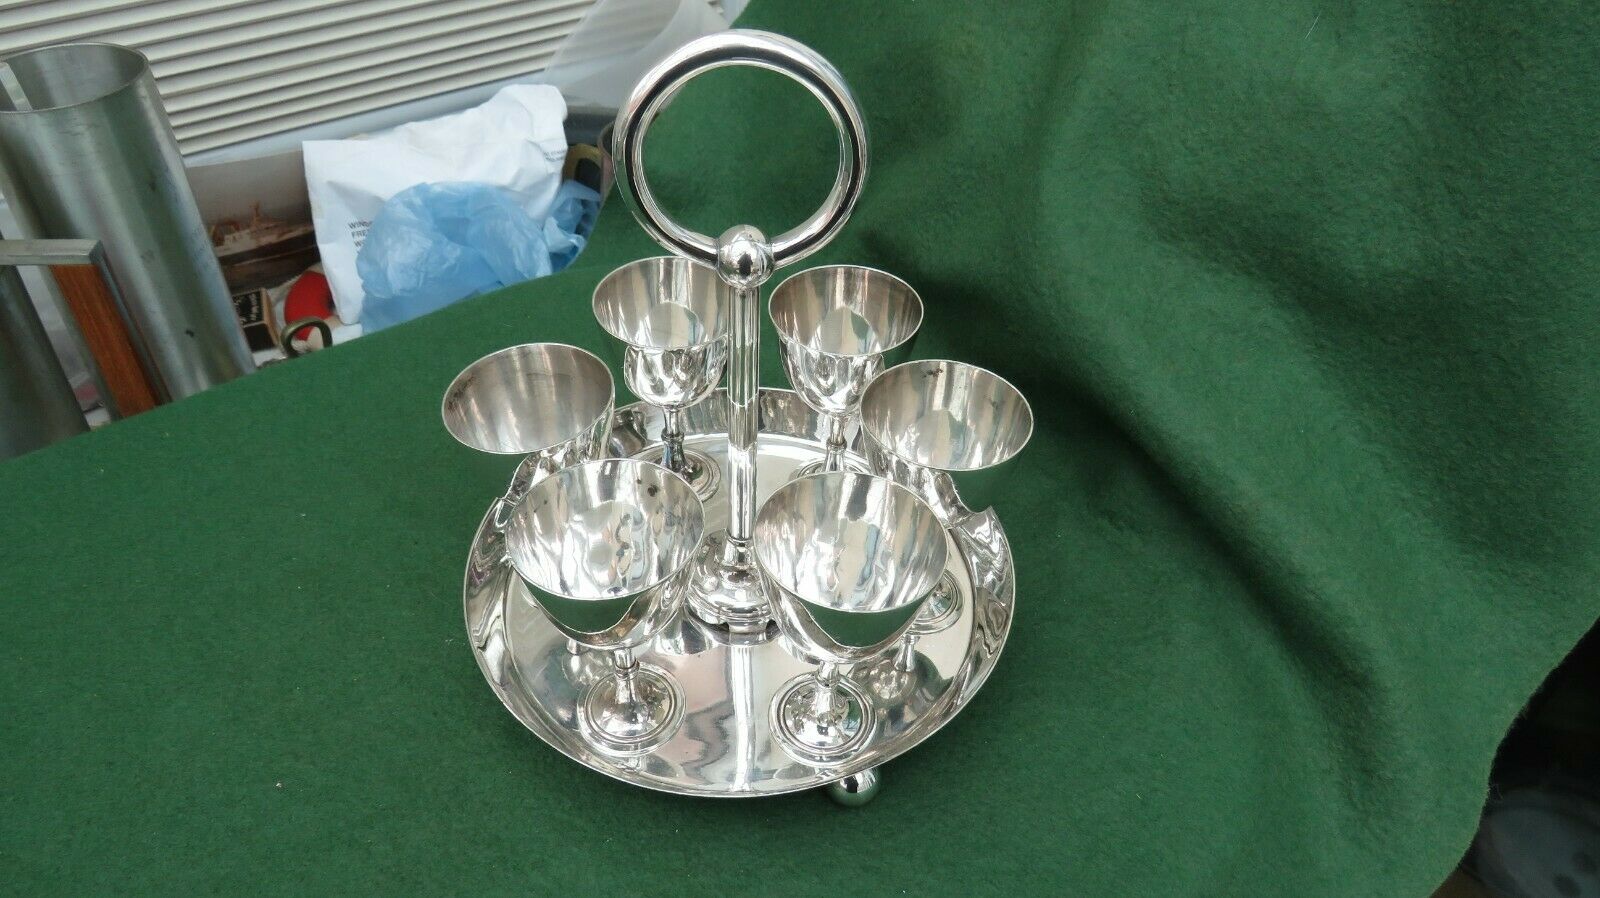 VICTORIAN SILVER PLATED EGG CADDY & 6 EGG CUPS BY WILLIAM HUTTON & SON 1873